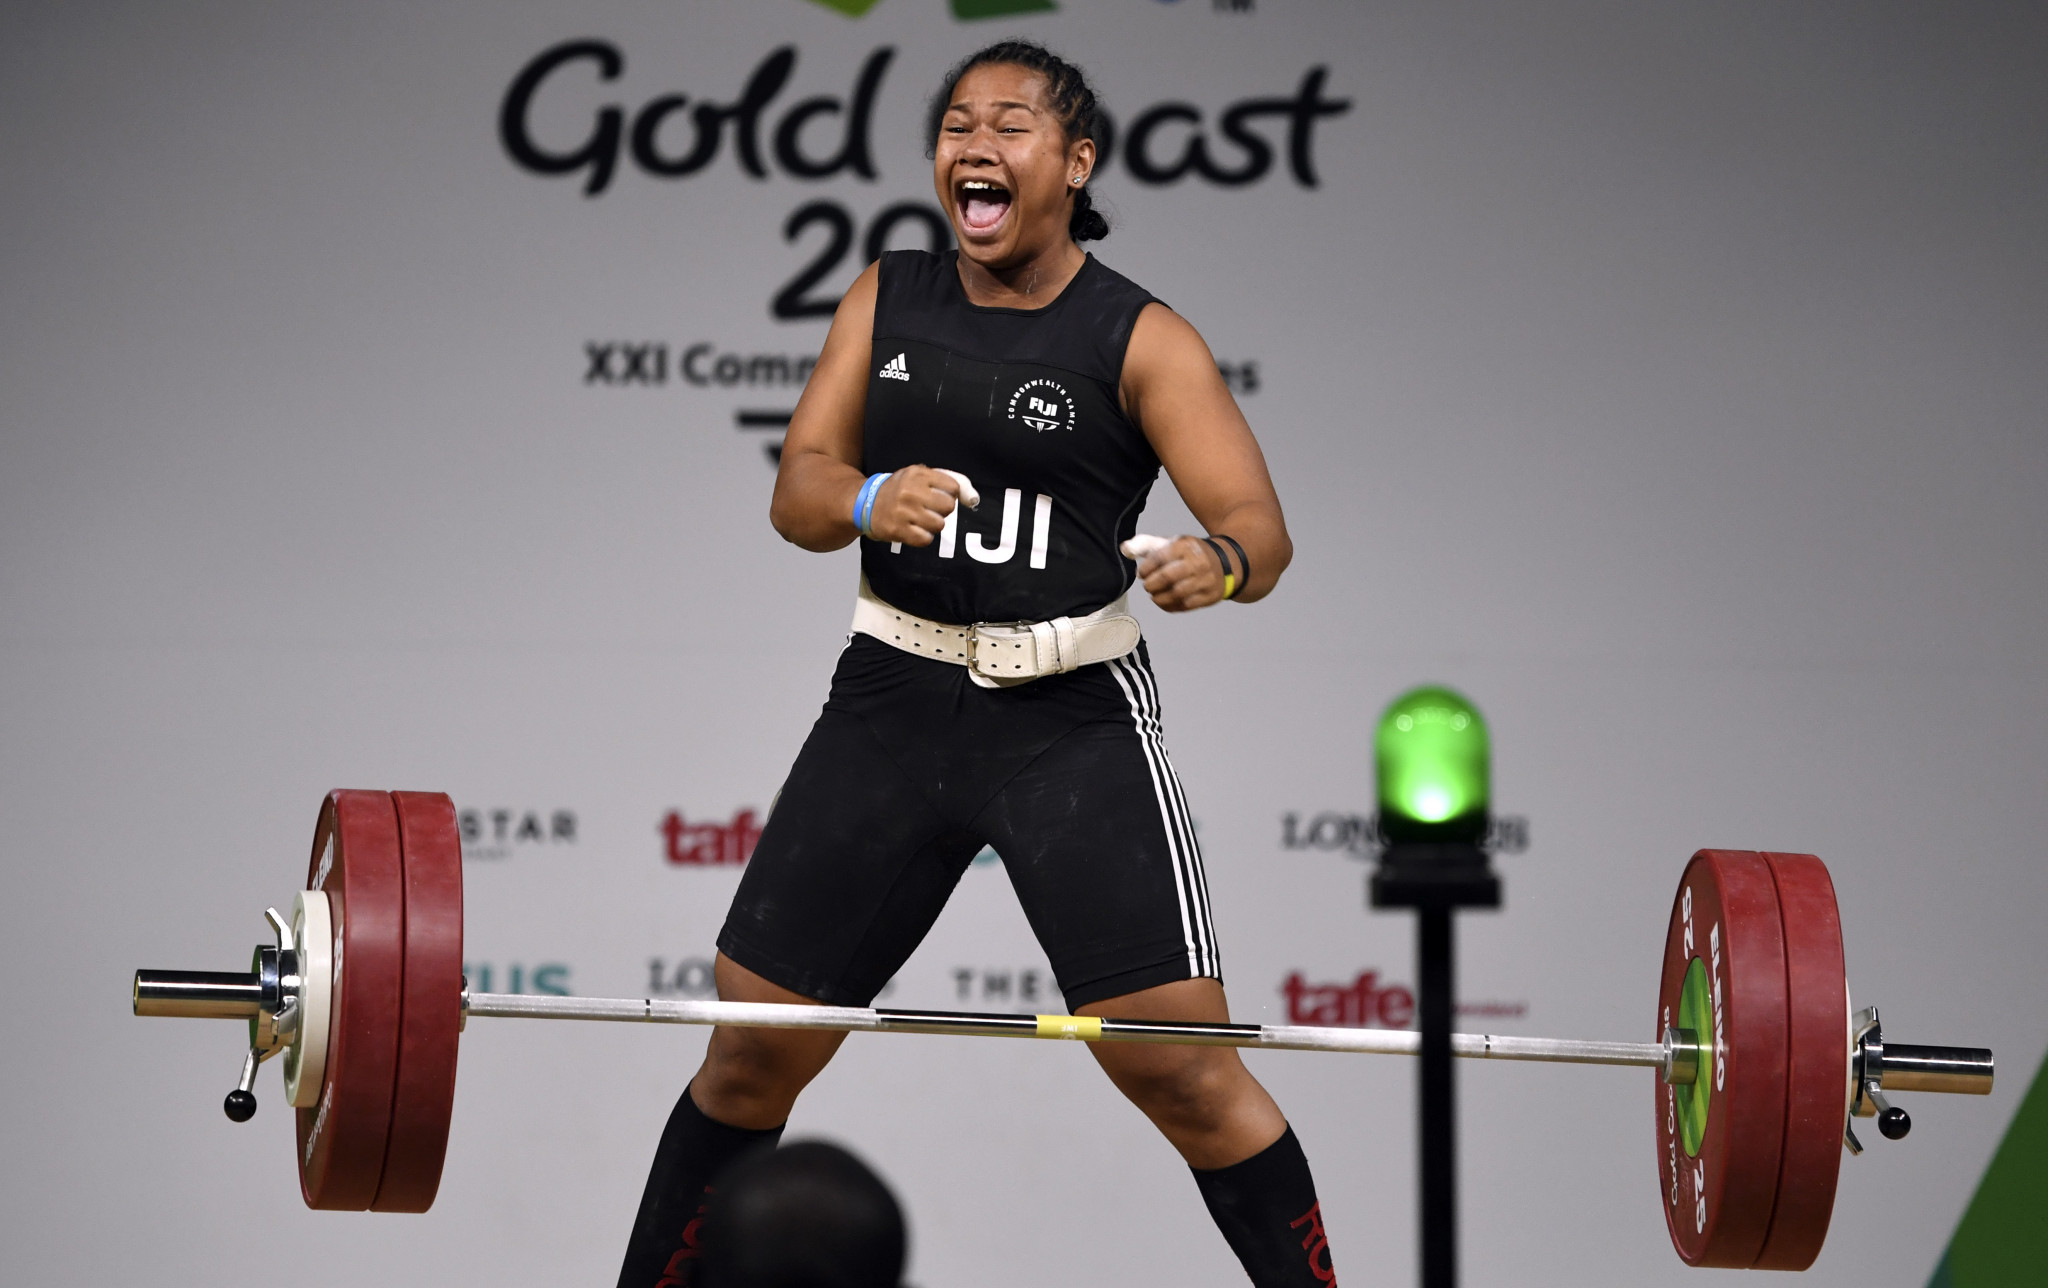 Eileen Cikamatana won gold for Fiji at the 2018 Commonwealth Games in the women's 90kg weightlifting final ©Getty Images